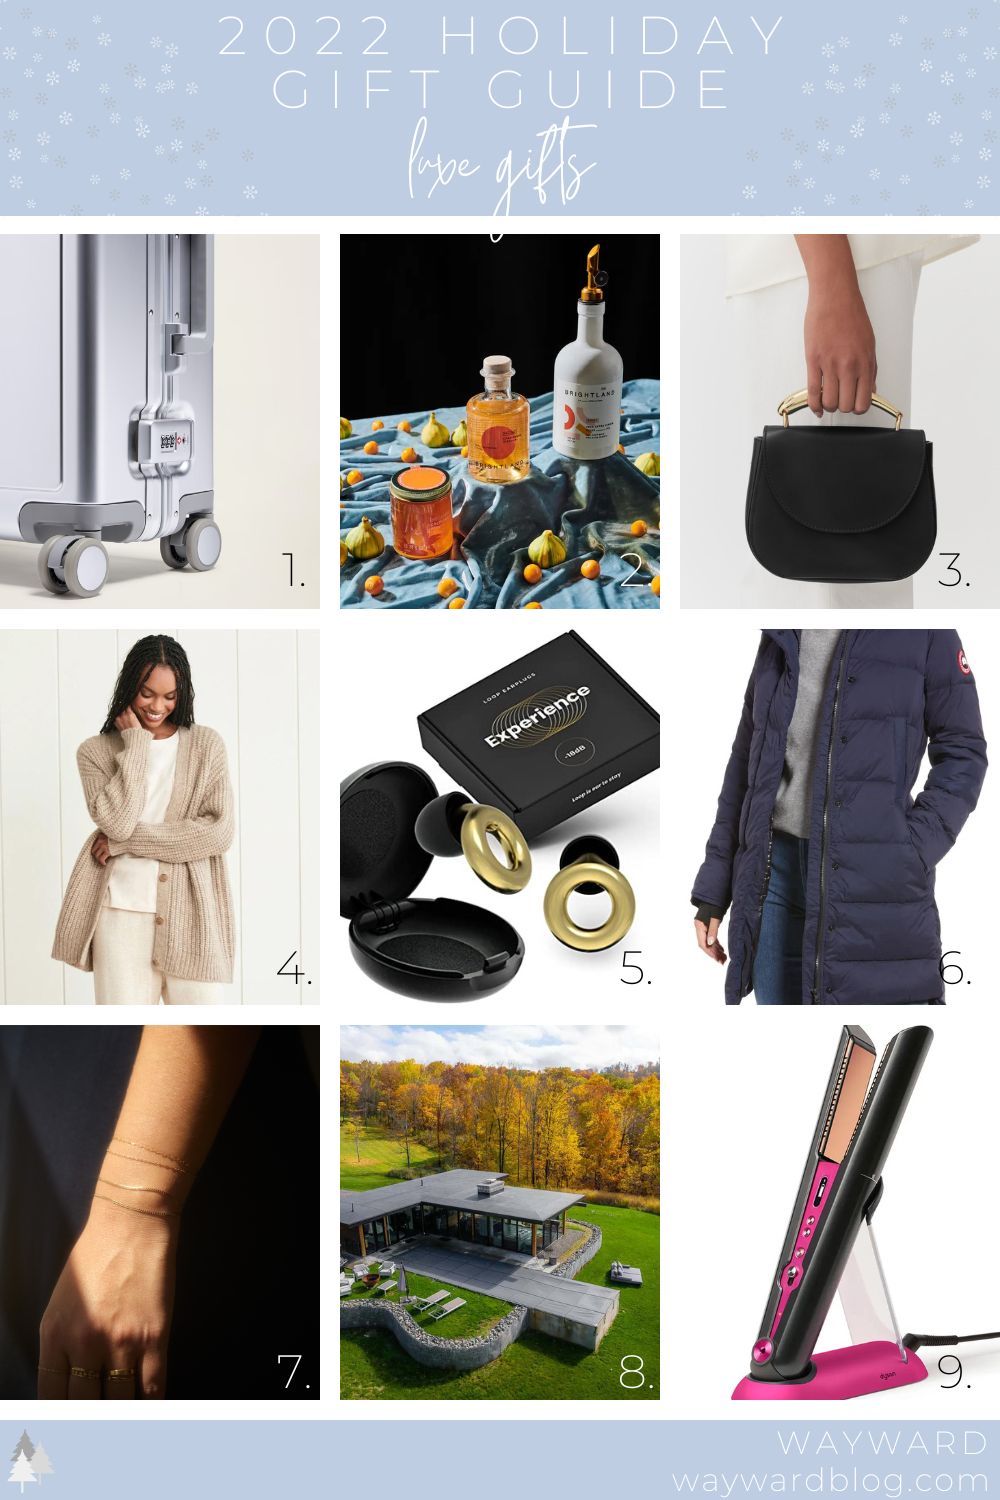 Collage of images in the luxe gift guide